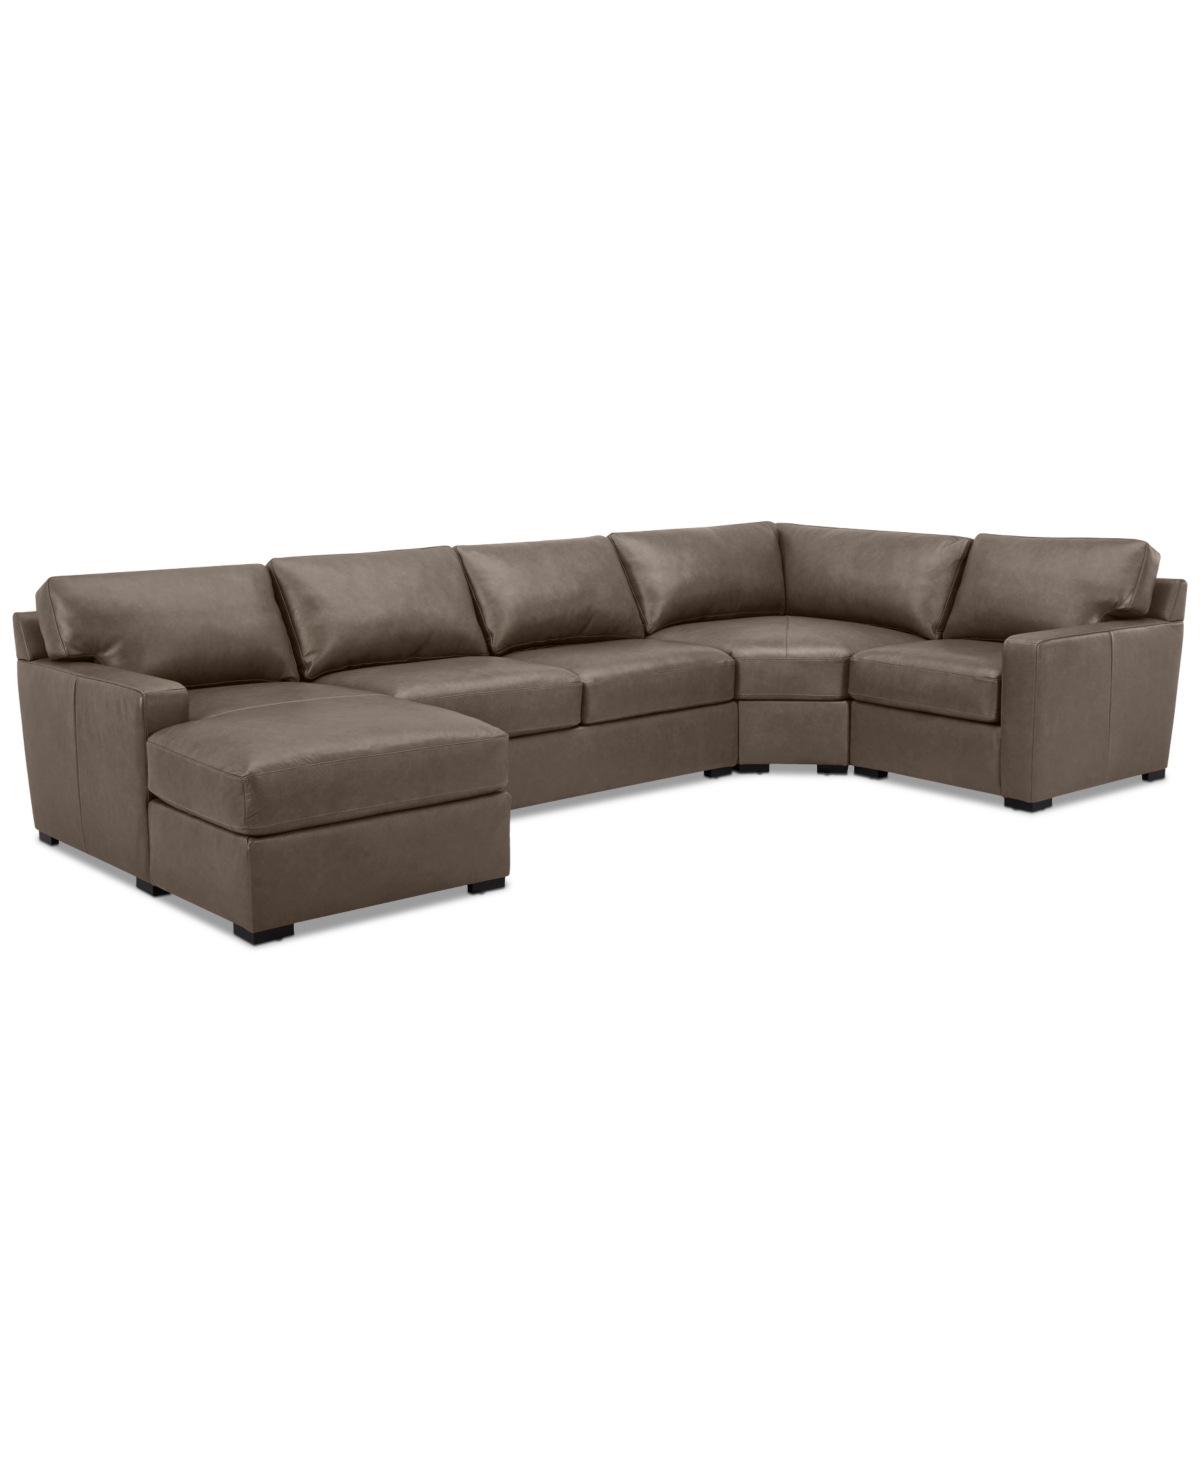 Macy's Radley 148" 4-pc. Leather Wedge Modular Chaise Sectional, Created For  In Medium Brown